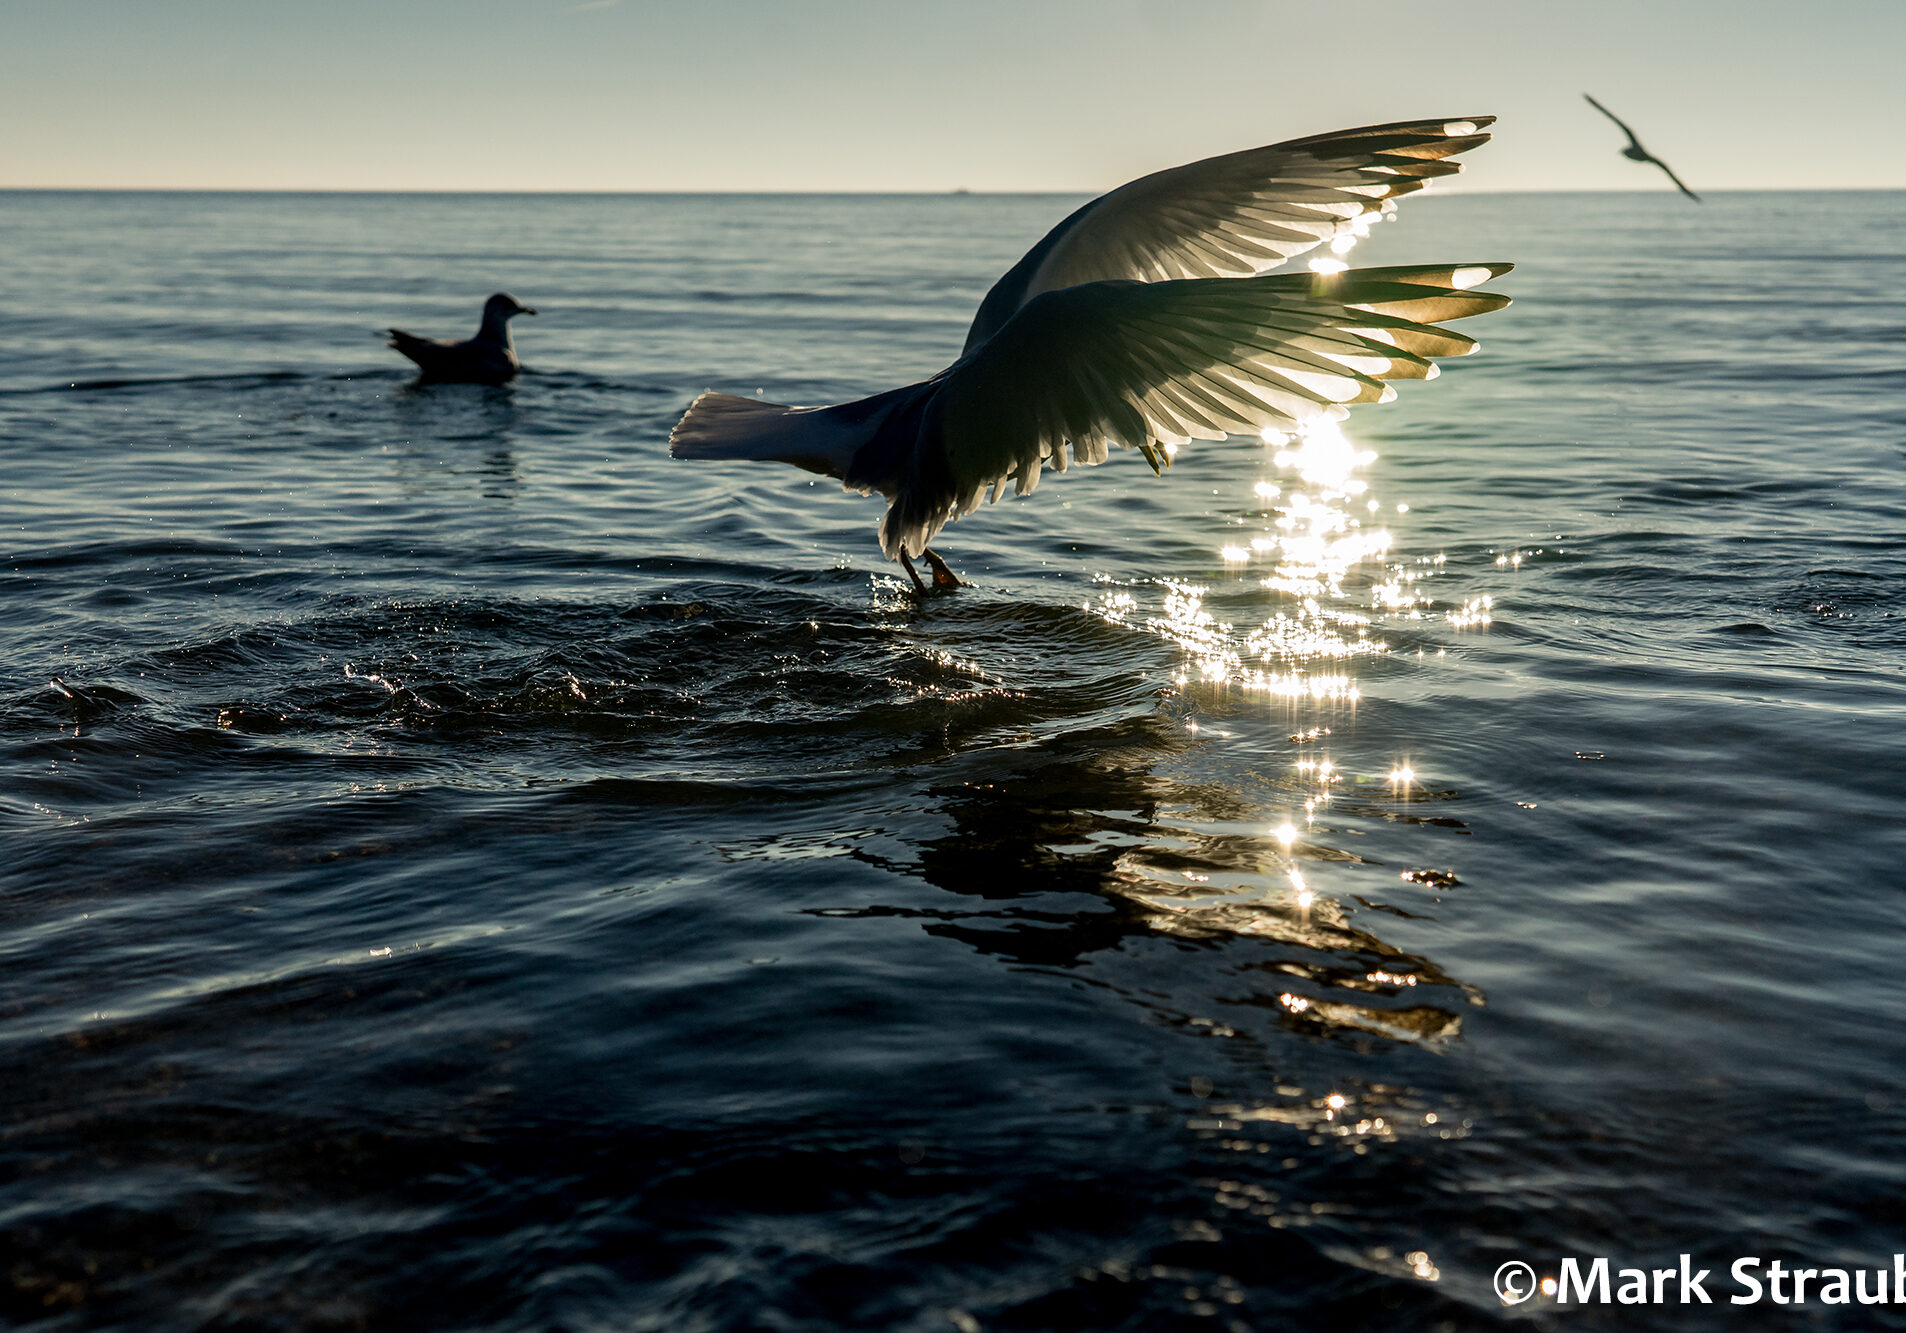 A bird takes off from the water at sundown